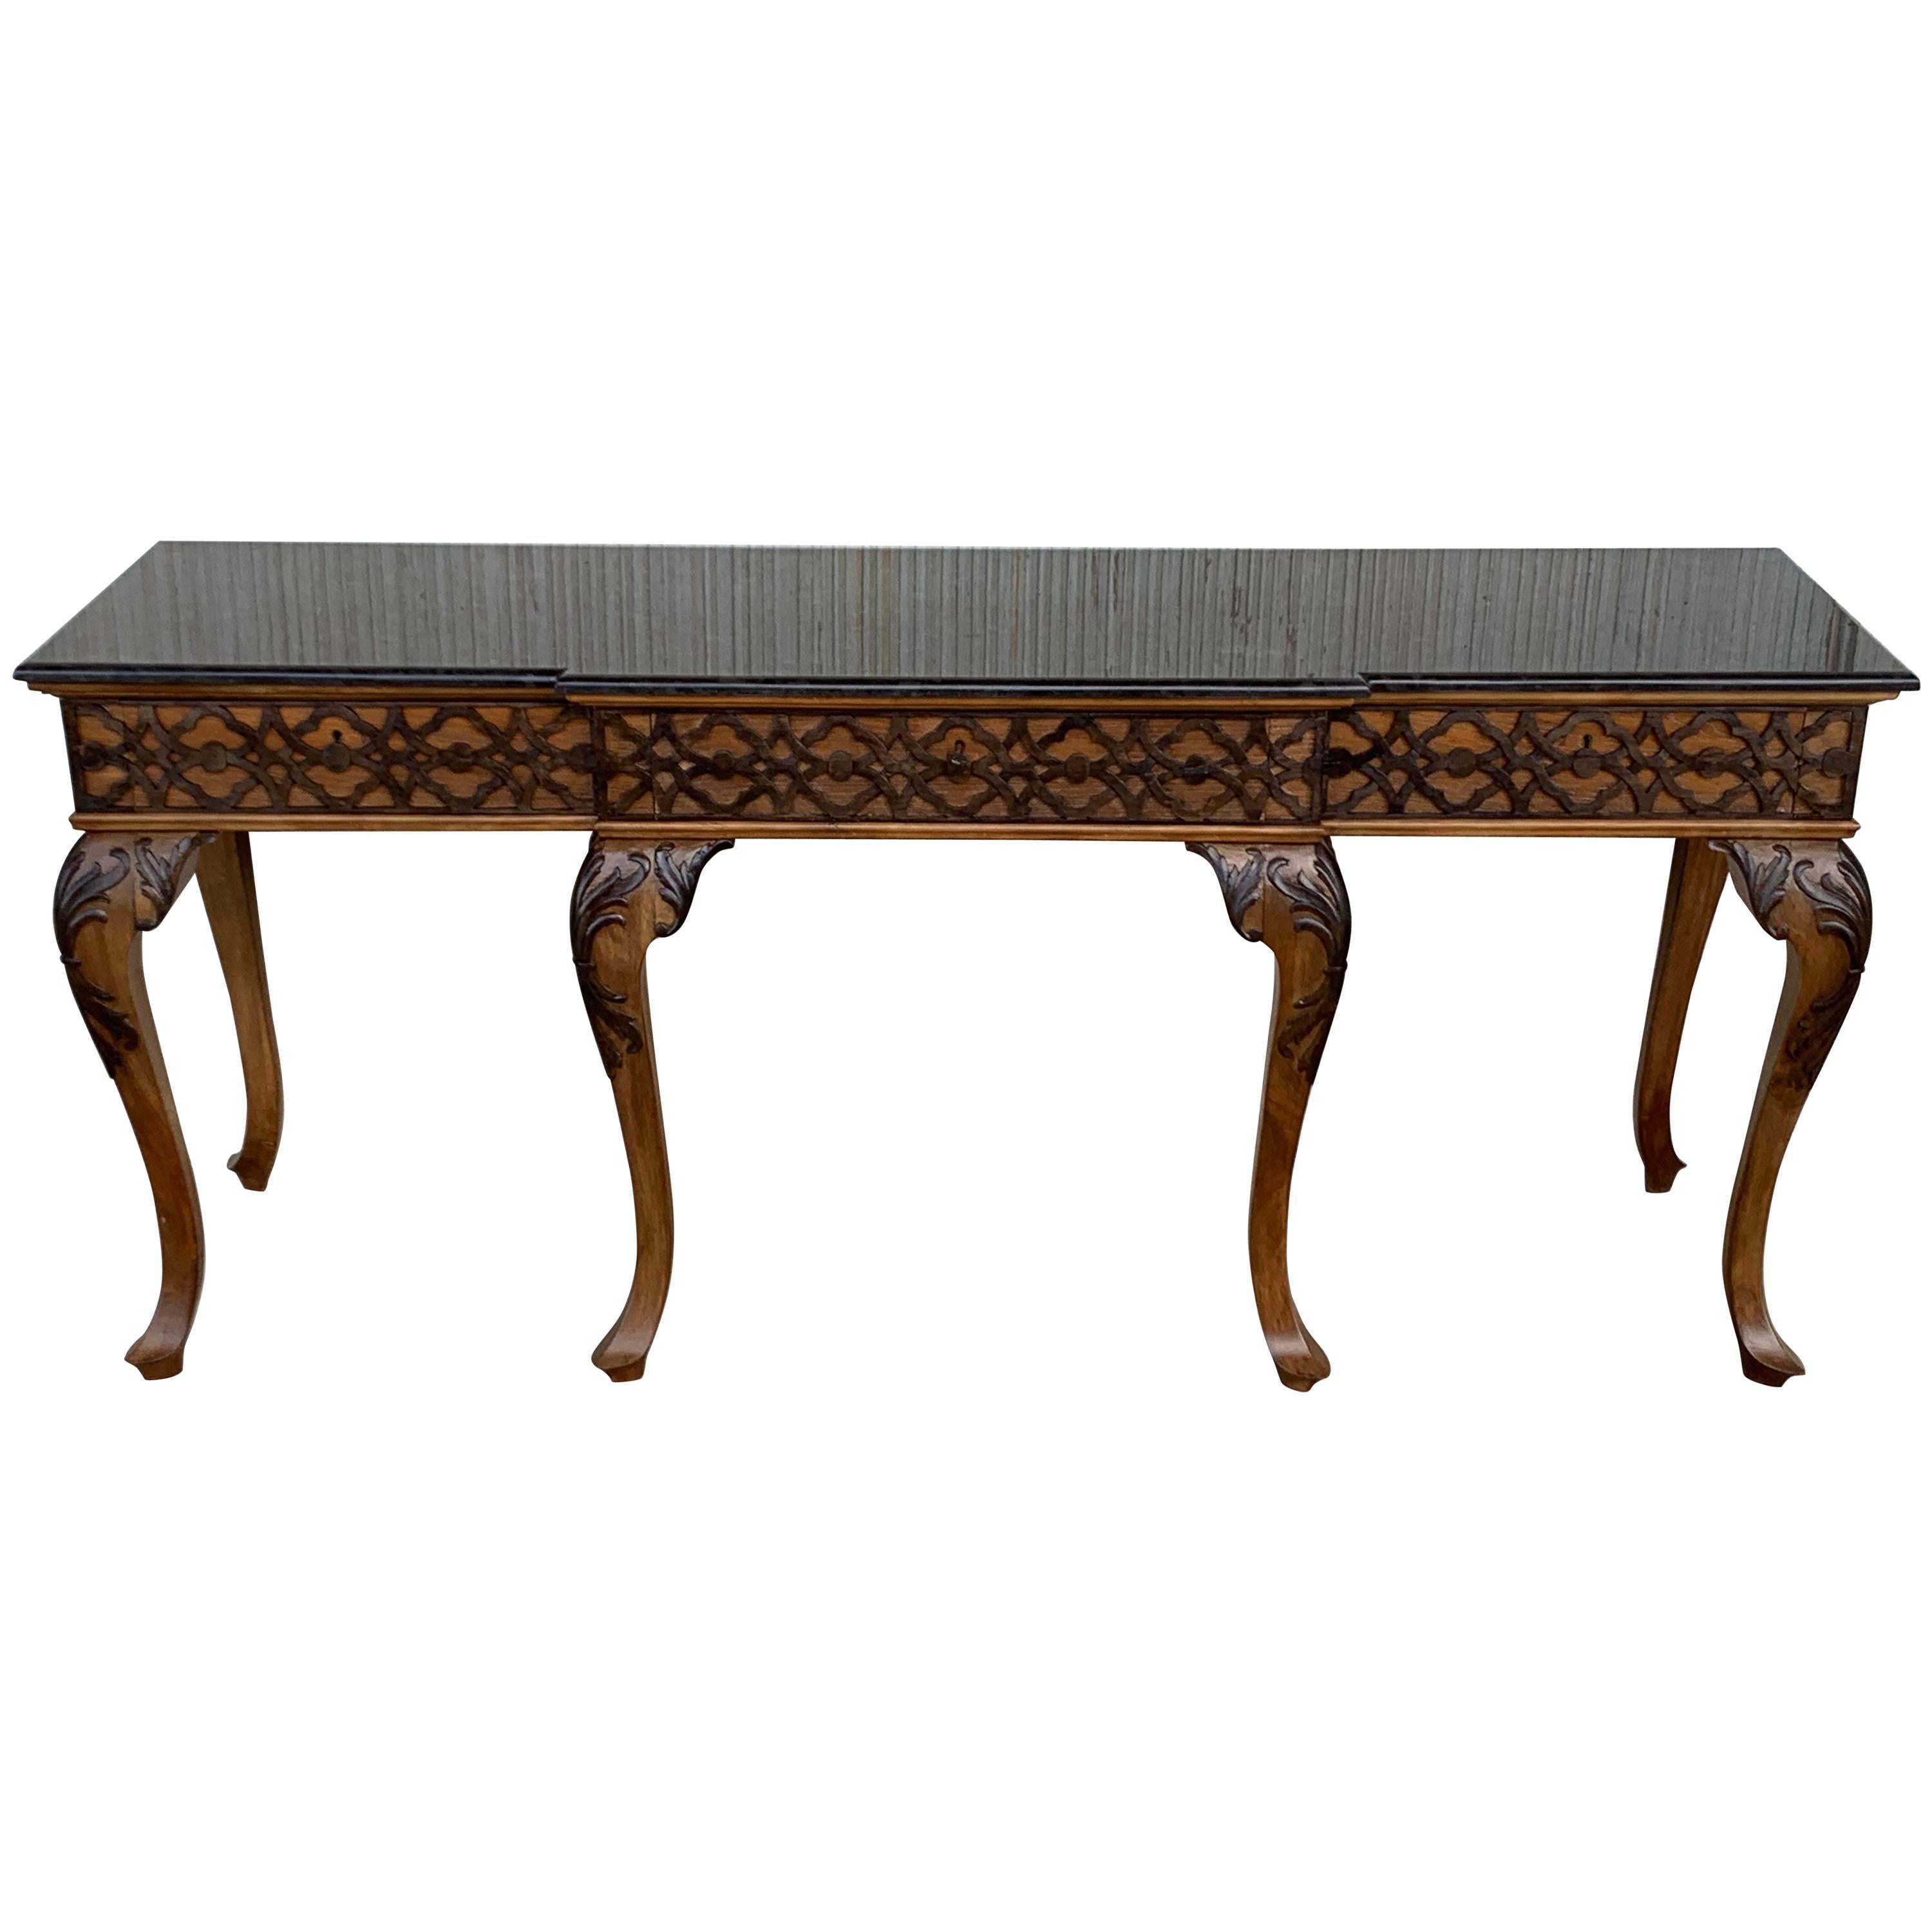 20th Century Large Console Table with Three Drawers Walnut Inlays and Marble Top